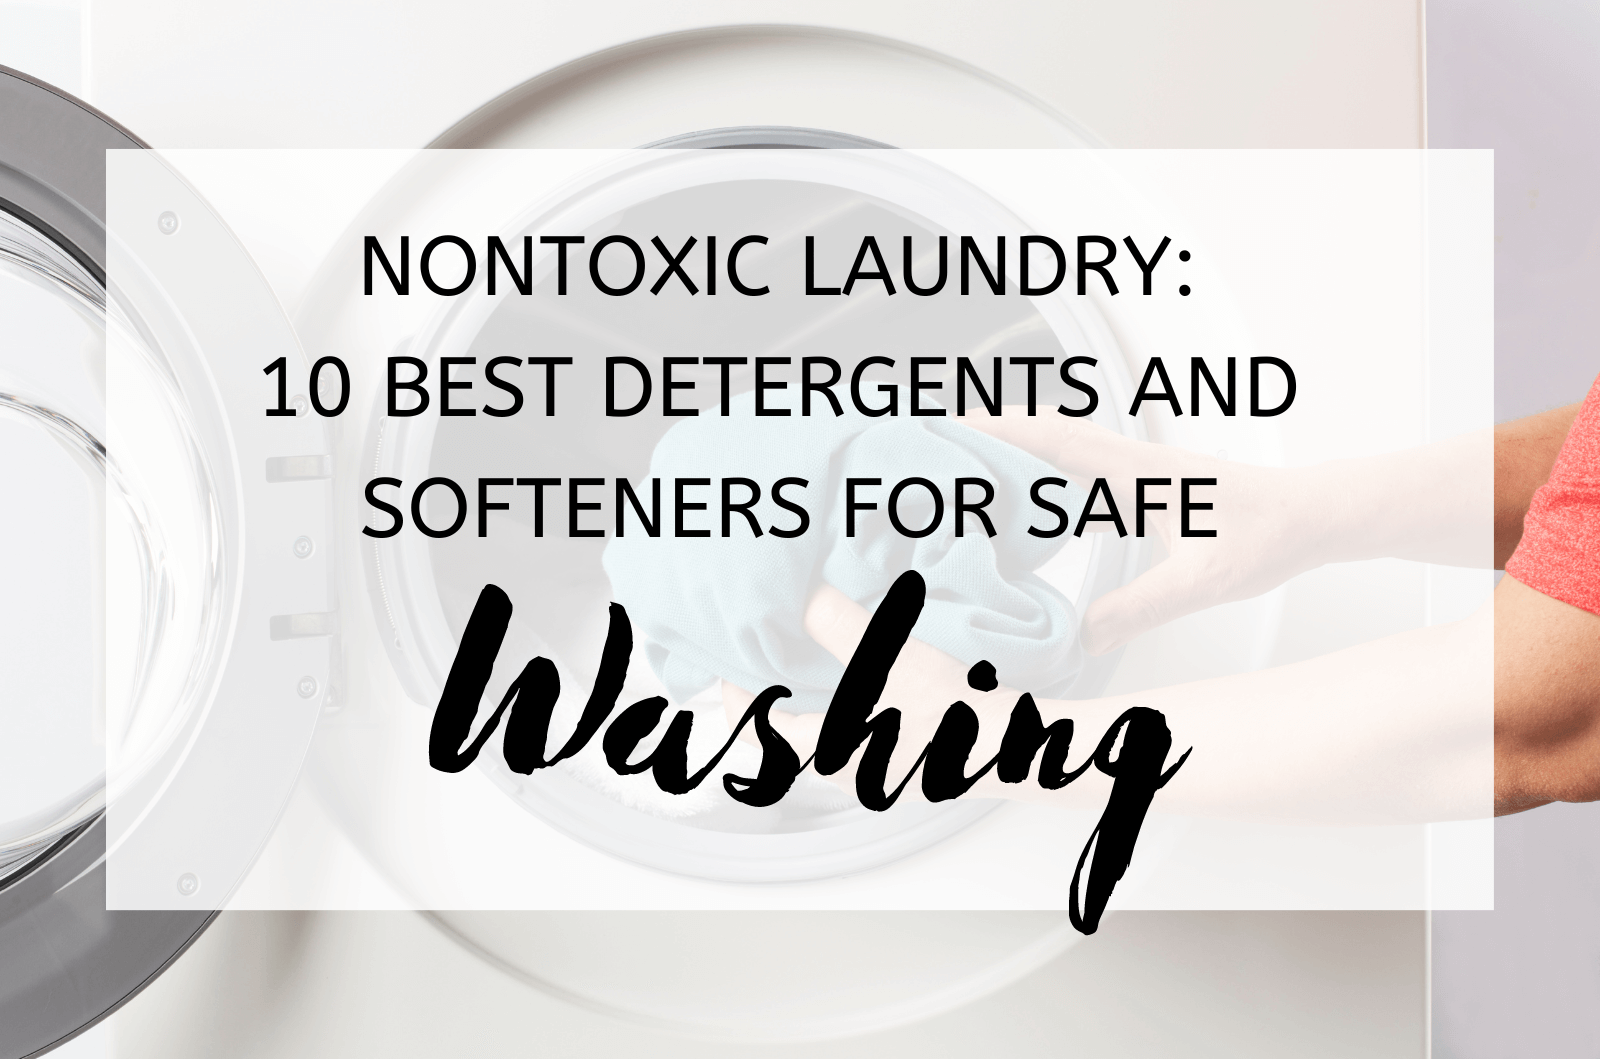 Nontoxic Laundry: 10 Best Detergents And Softeners For Safe Washing